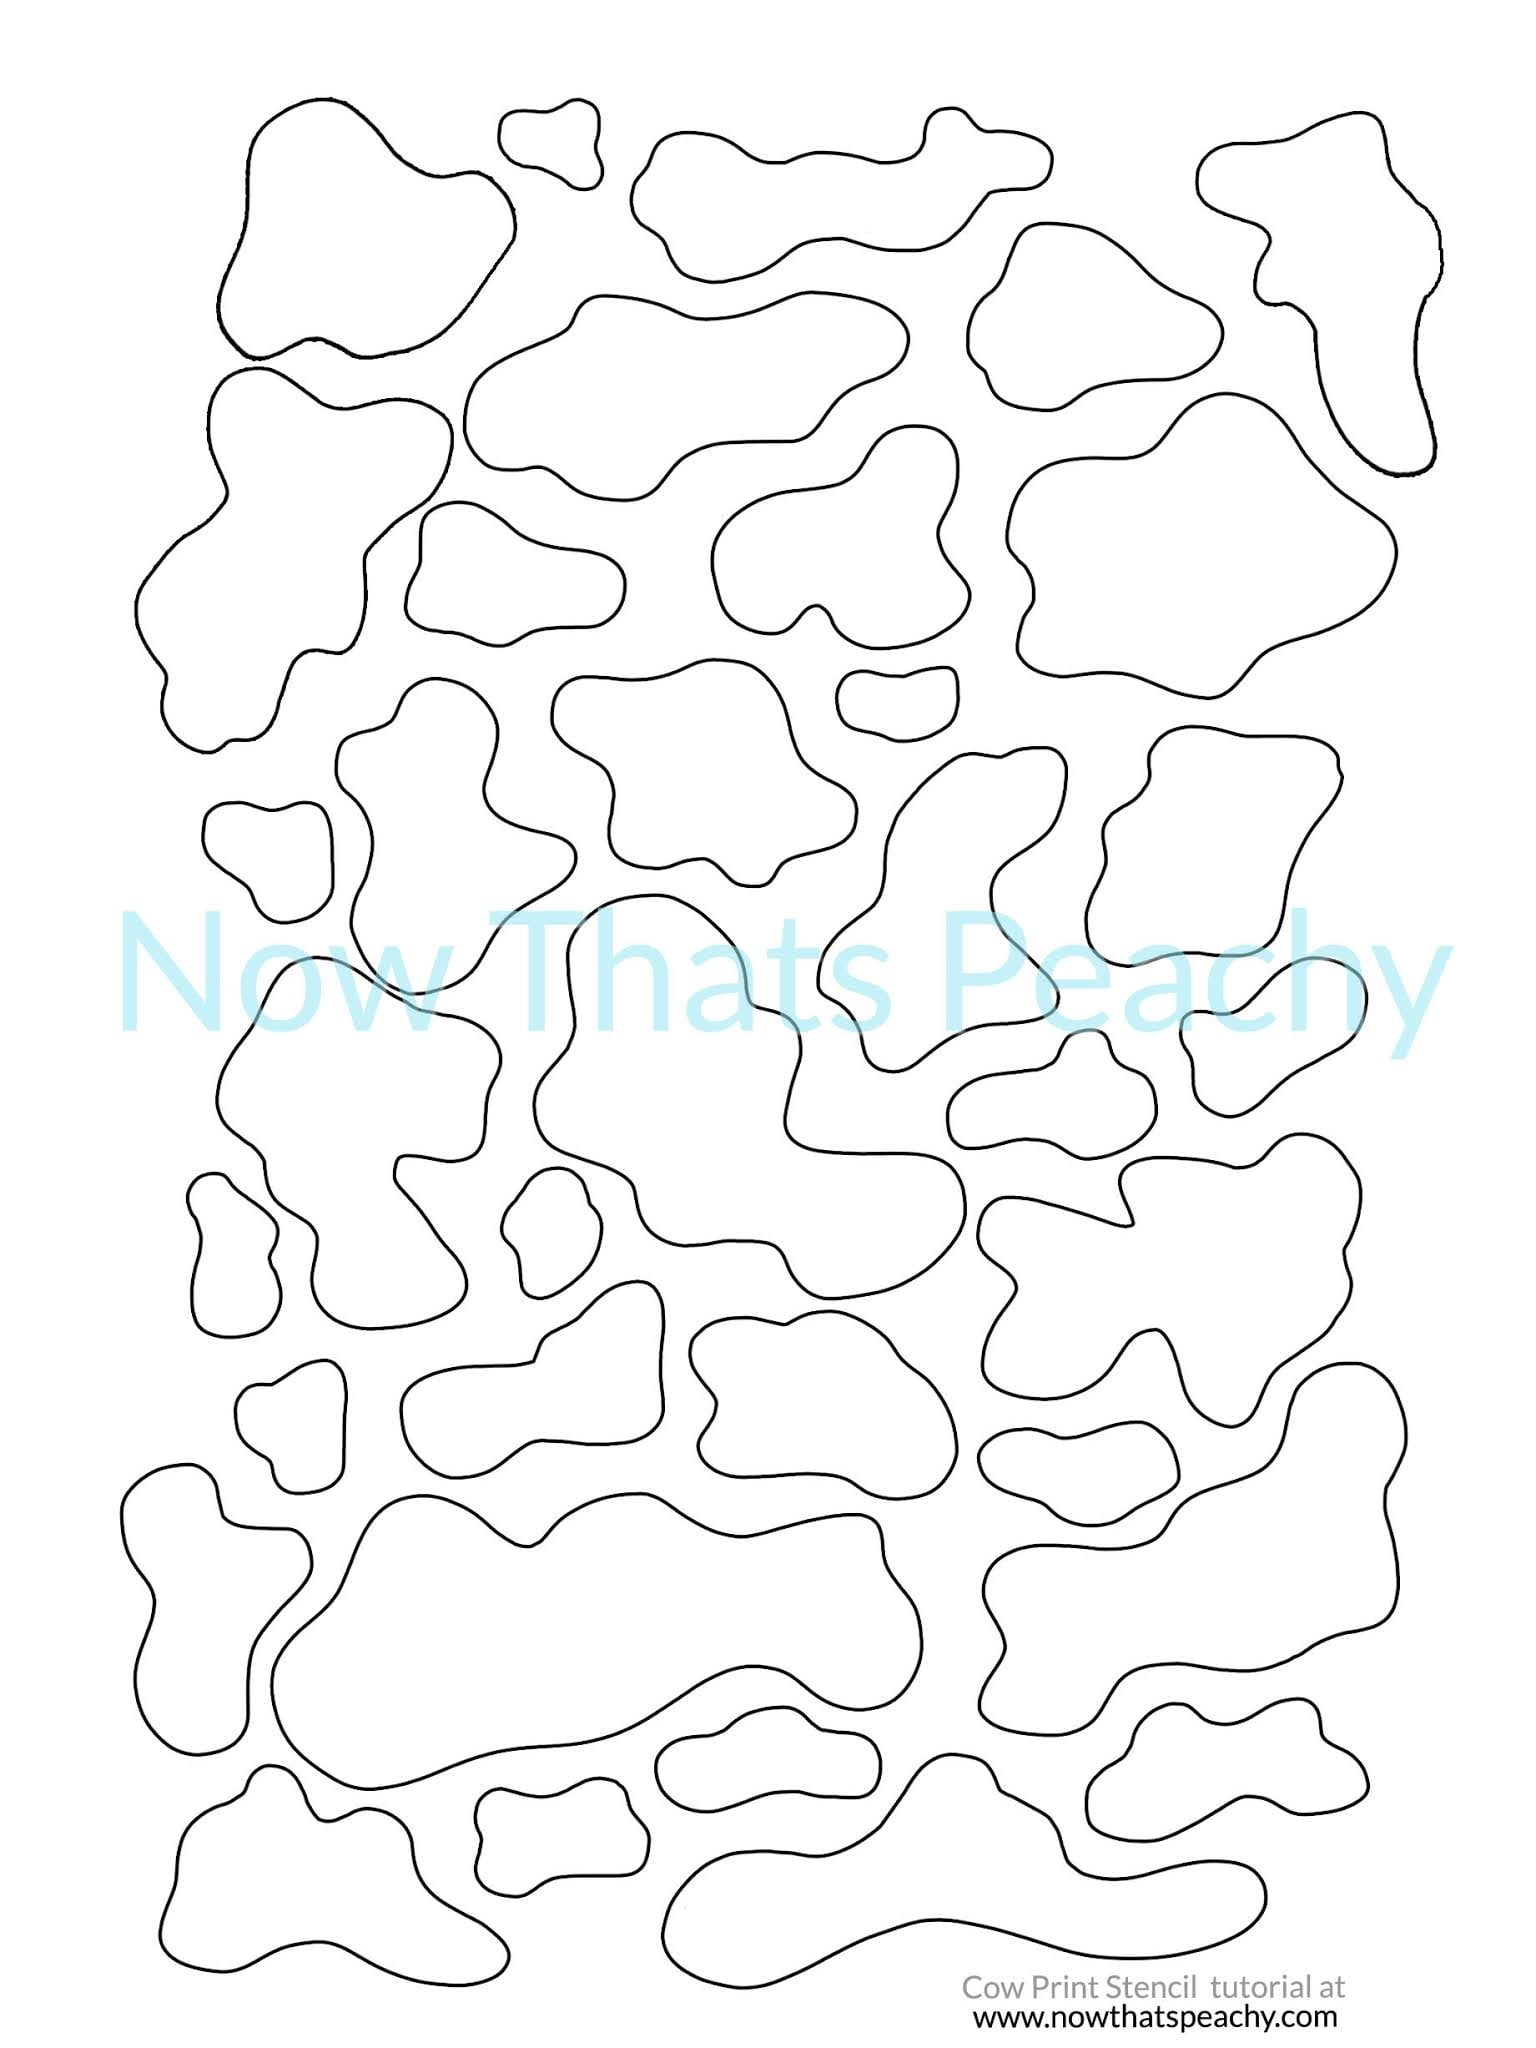 How To Stencil On Fabric FREE Cow Print Printable Template Now Thats Peachy